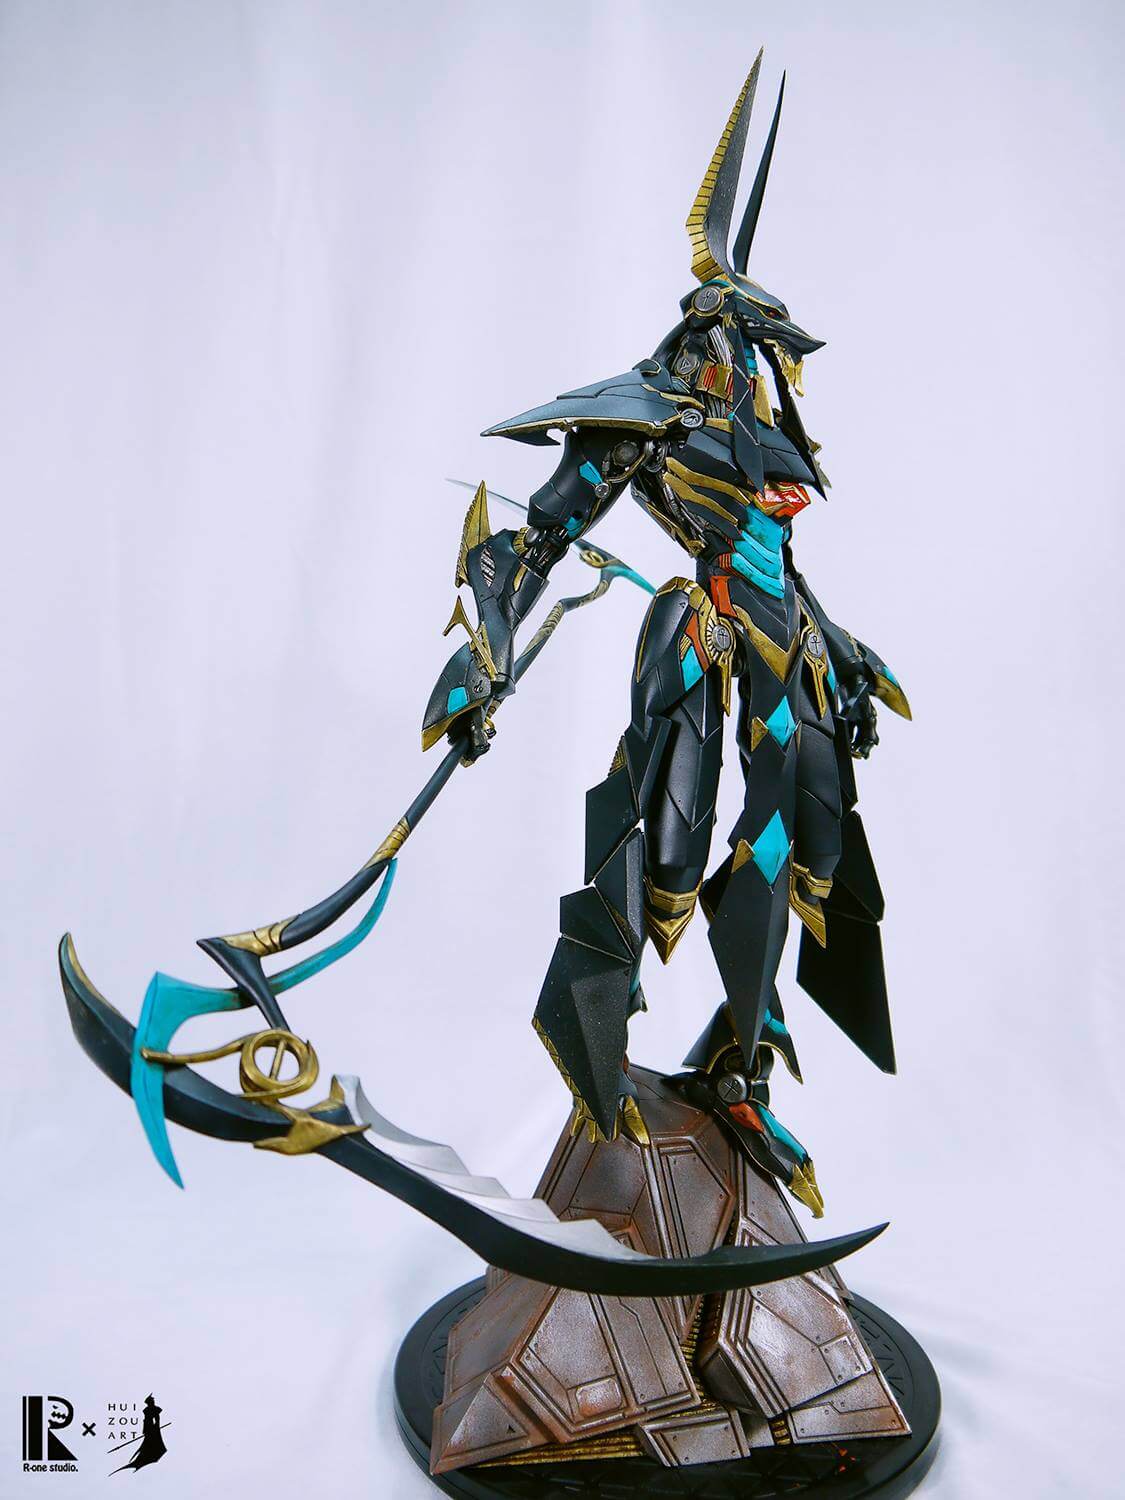 Undead Trial Anubis By Hui Zou Art x R-One Studio - The Toy Chronicle